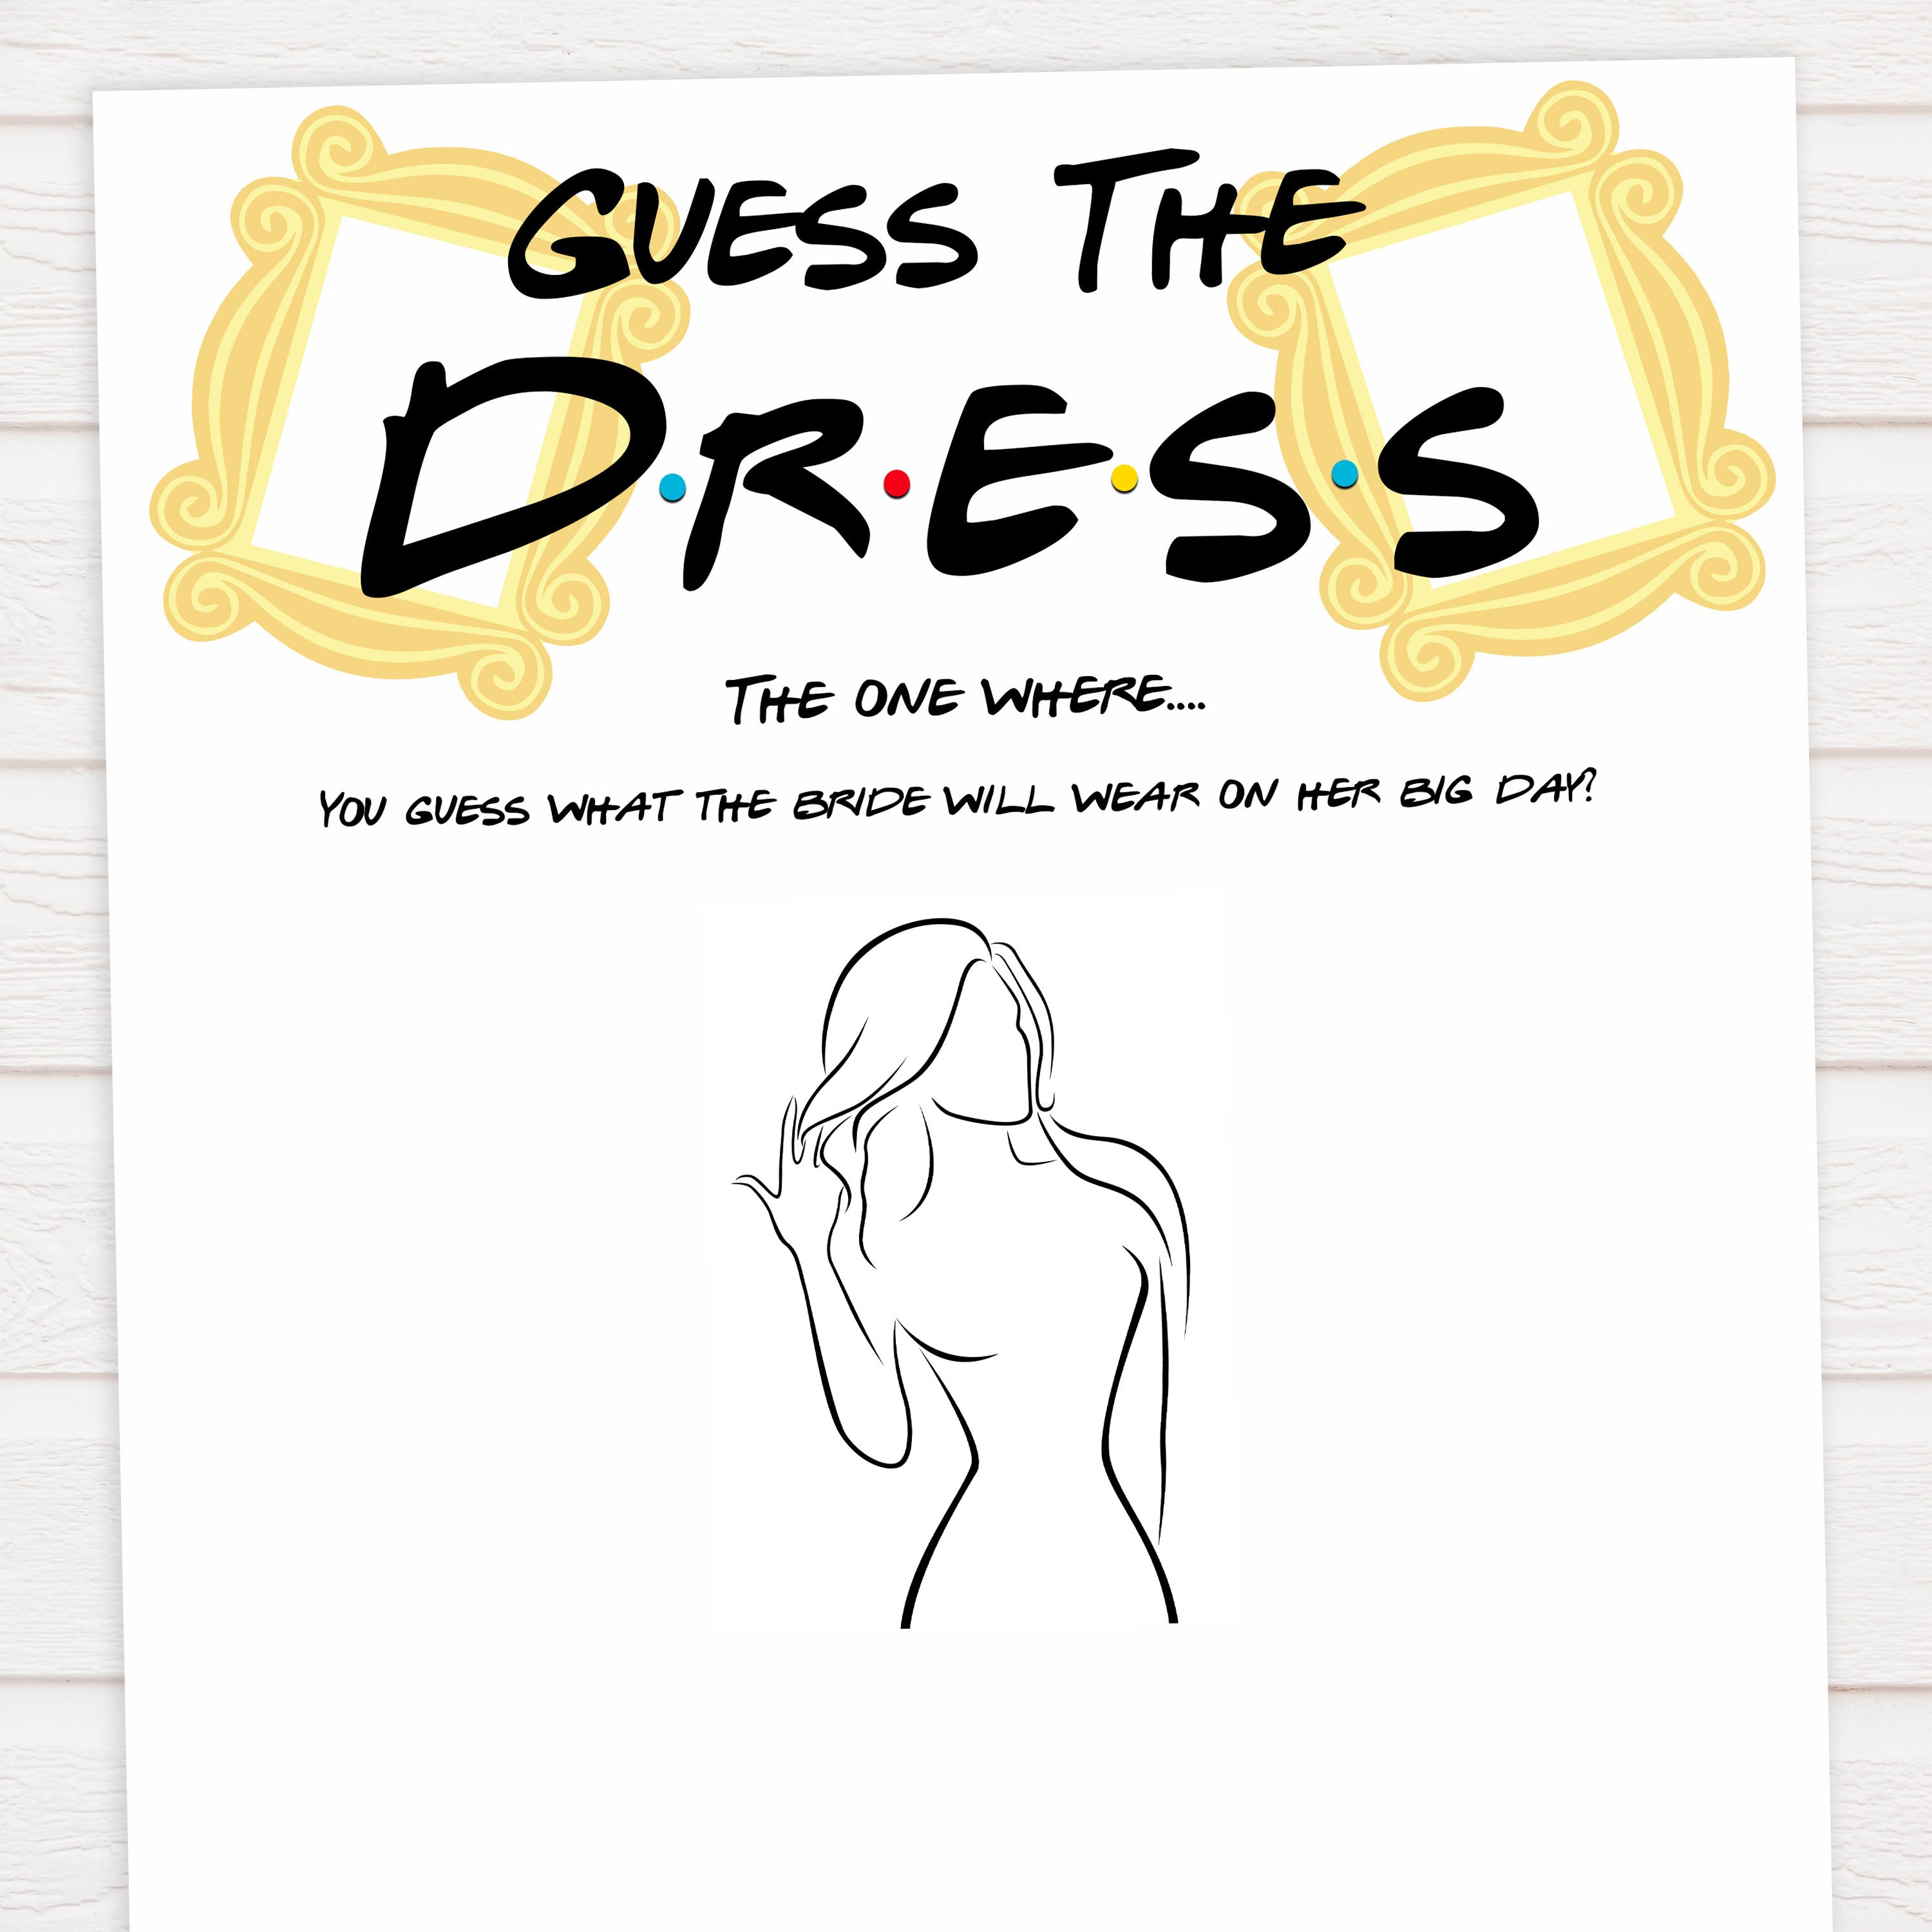 guess the dress game, Printable bridal shower games, friends bridal shower, friends bridal shower games, fun bridal shower games, bridal shower game ideas, friends bridal shower